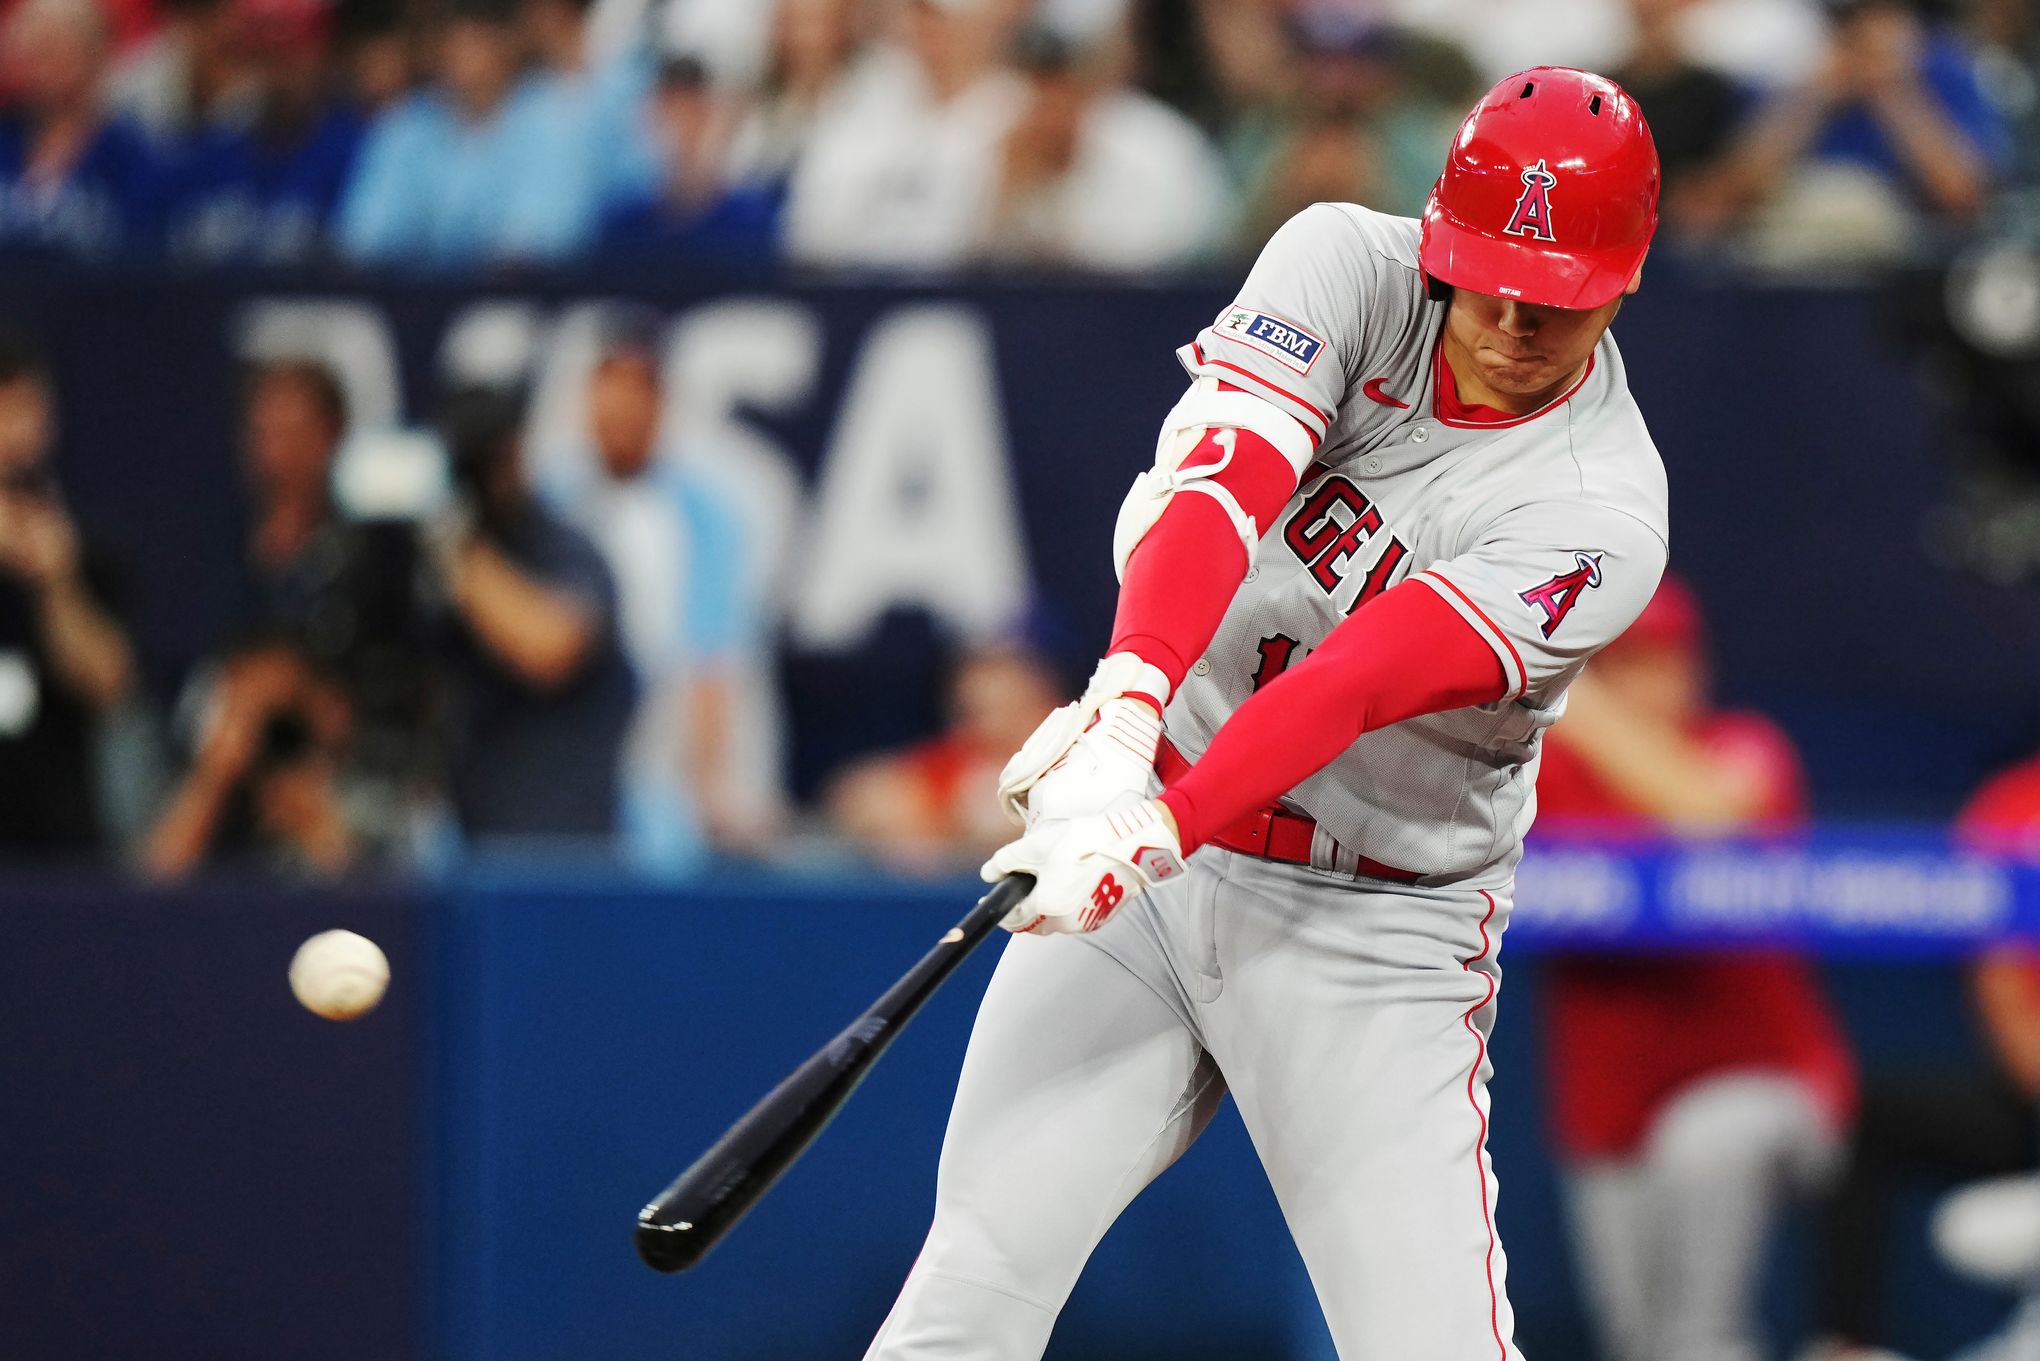 Andrew Velazquez has been hit with Angels since leaving Yankees